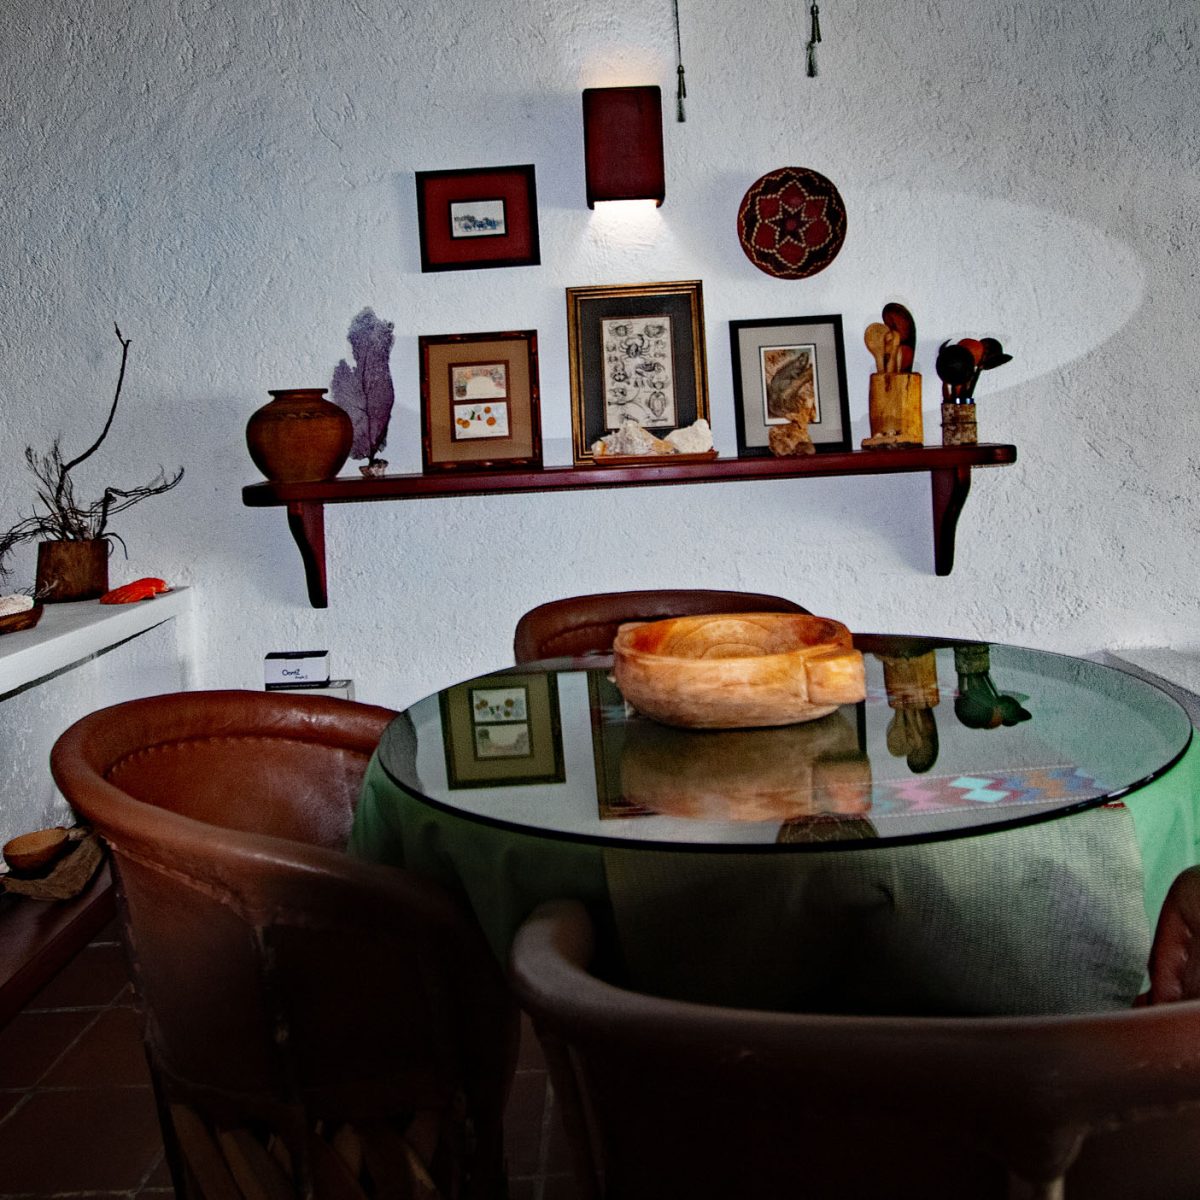 Azul Cielo, La Sirena #12, the dining area features a classical Mexican leather table and chairs with local artisan pottery